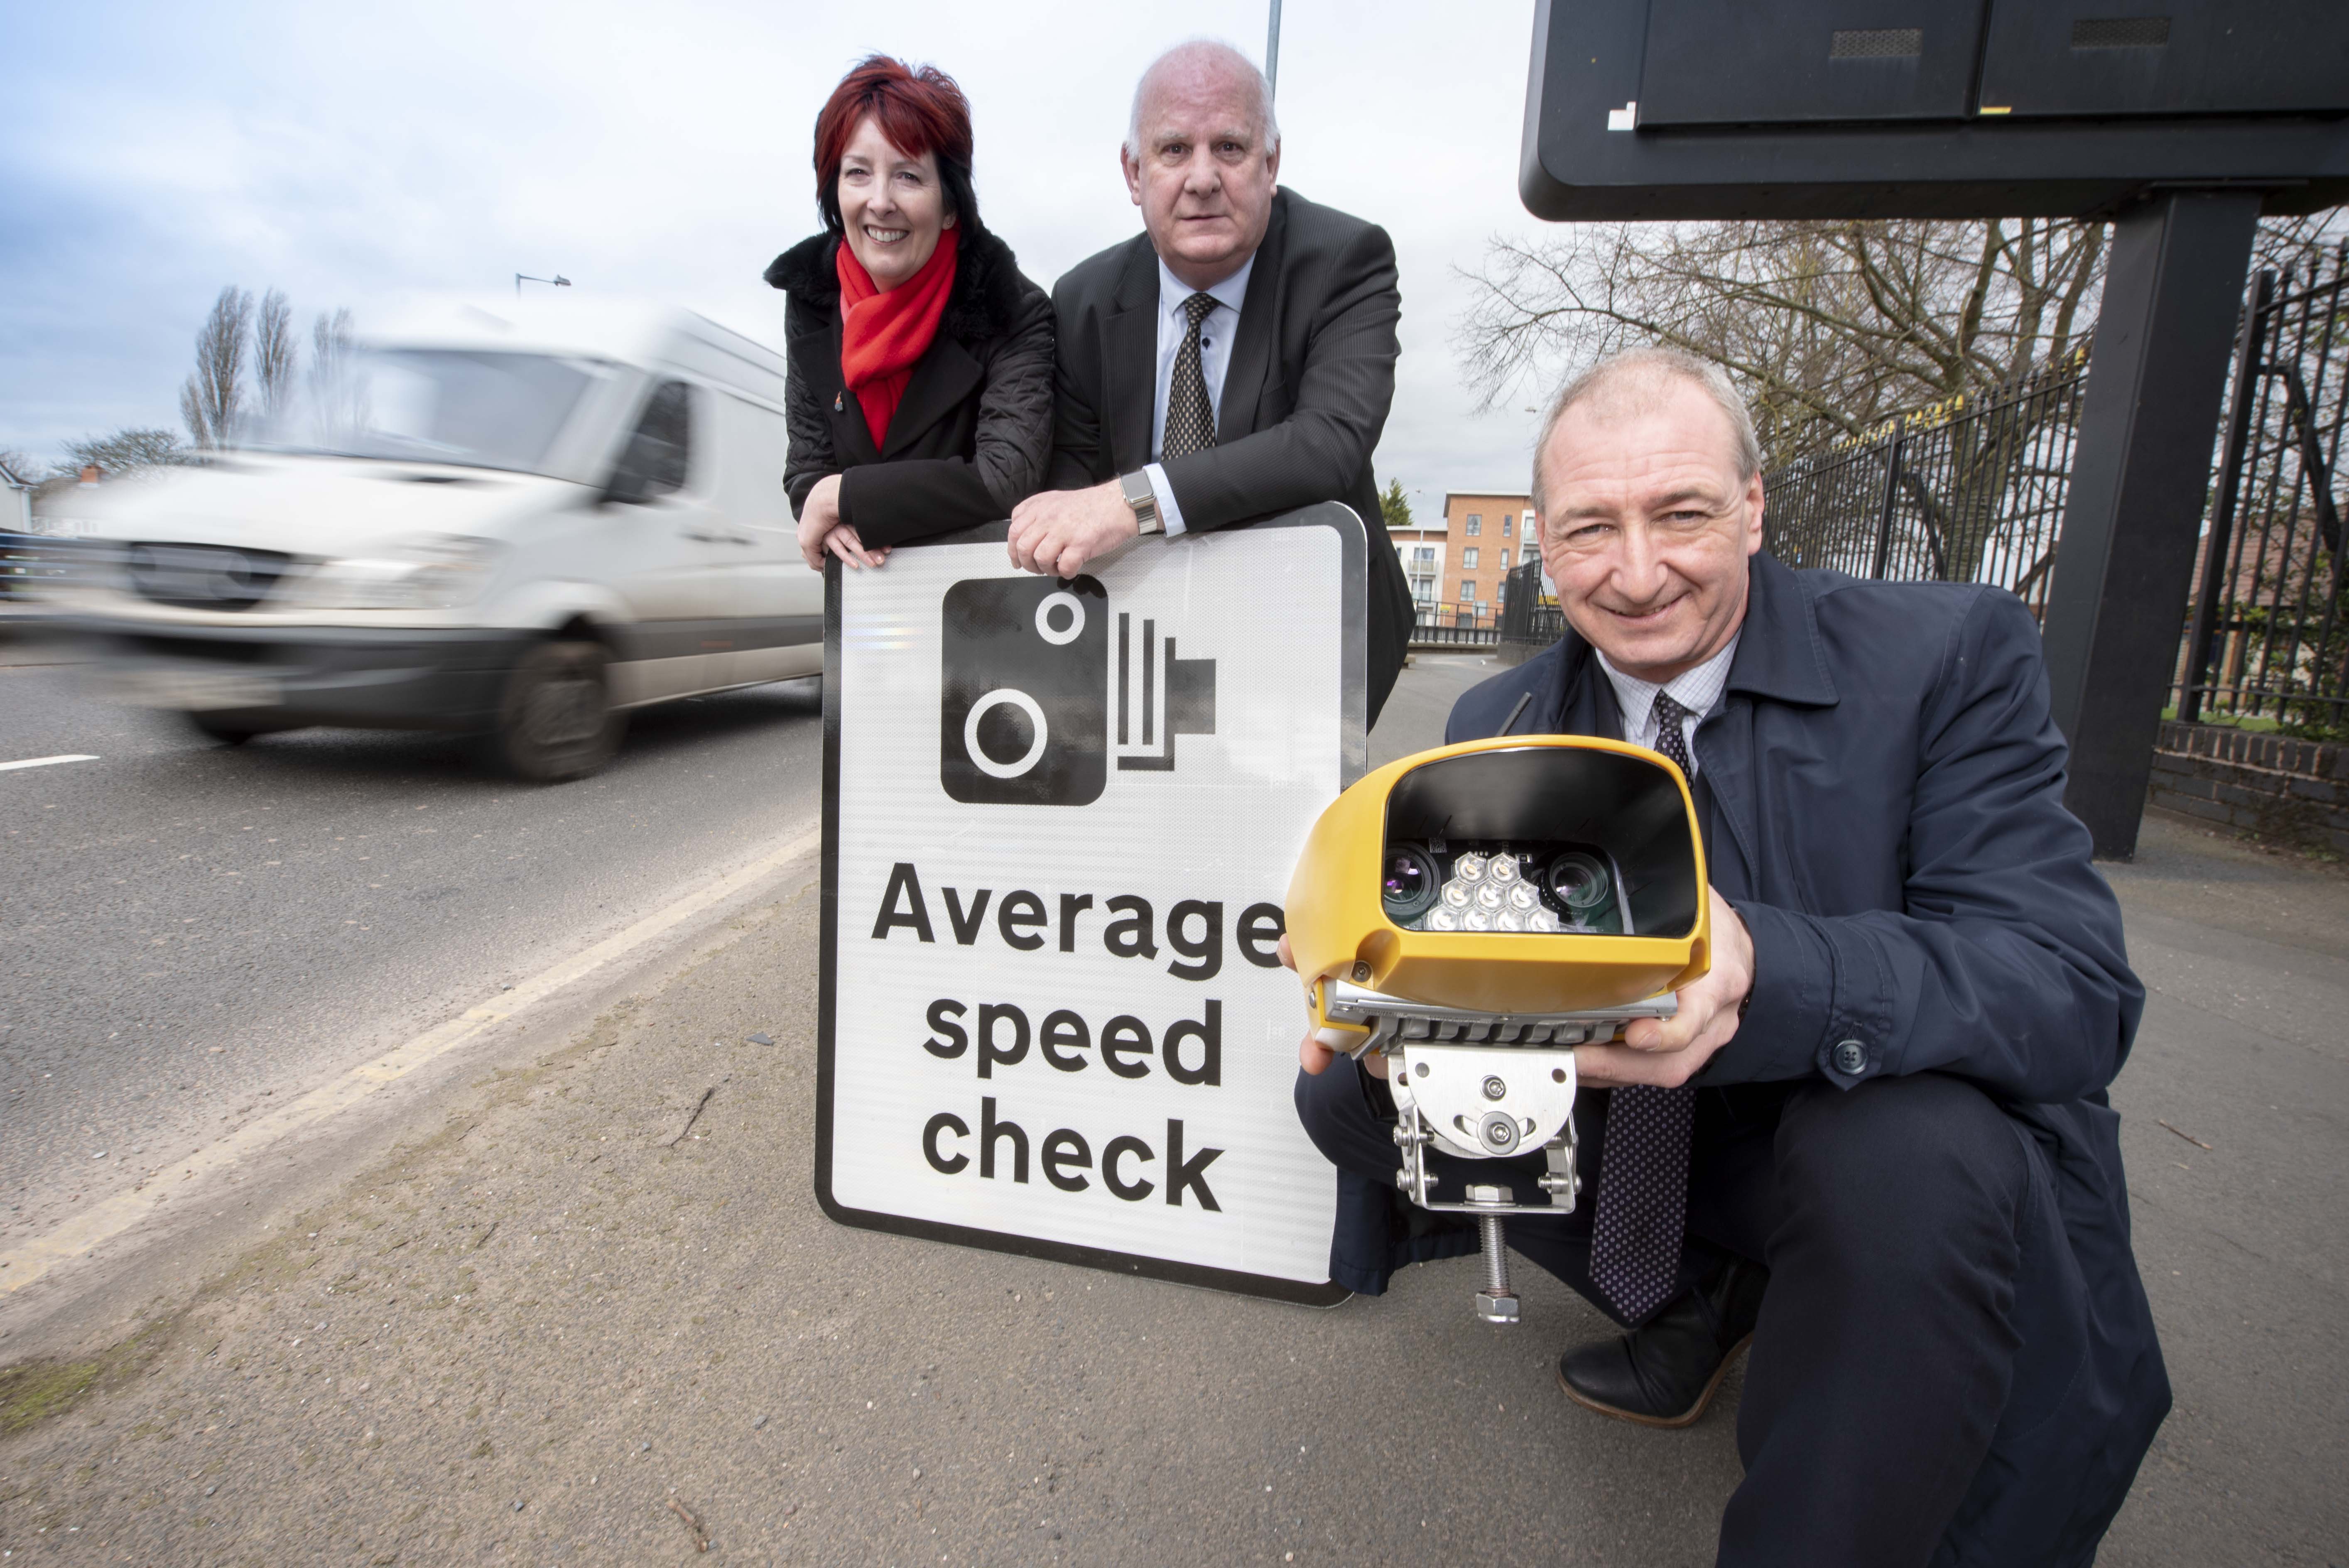 New cameras arrive in Wolverhampton to improve road safety